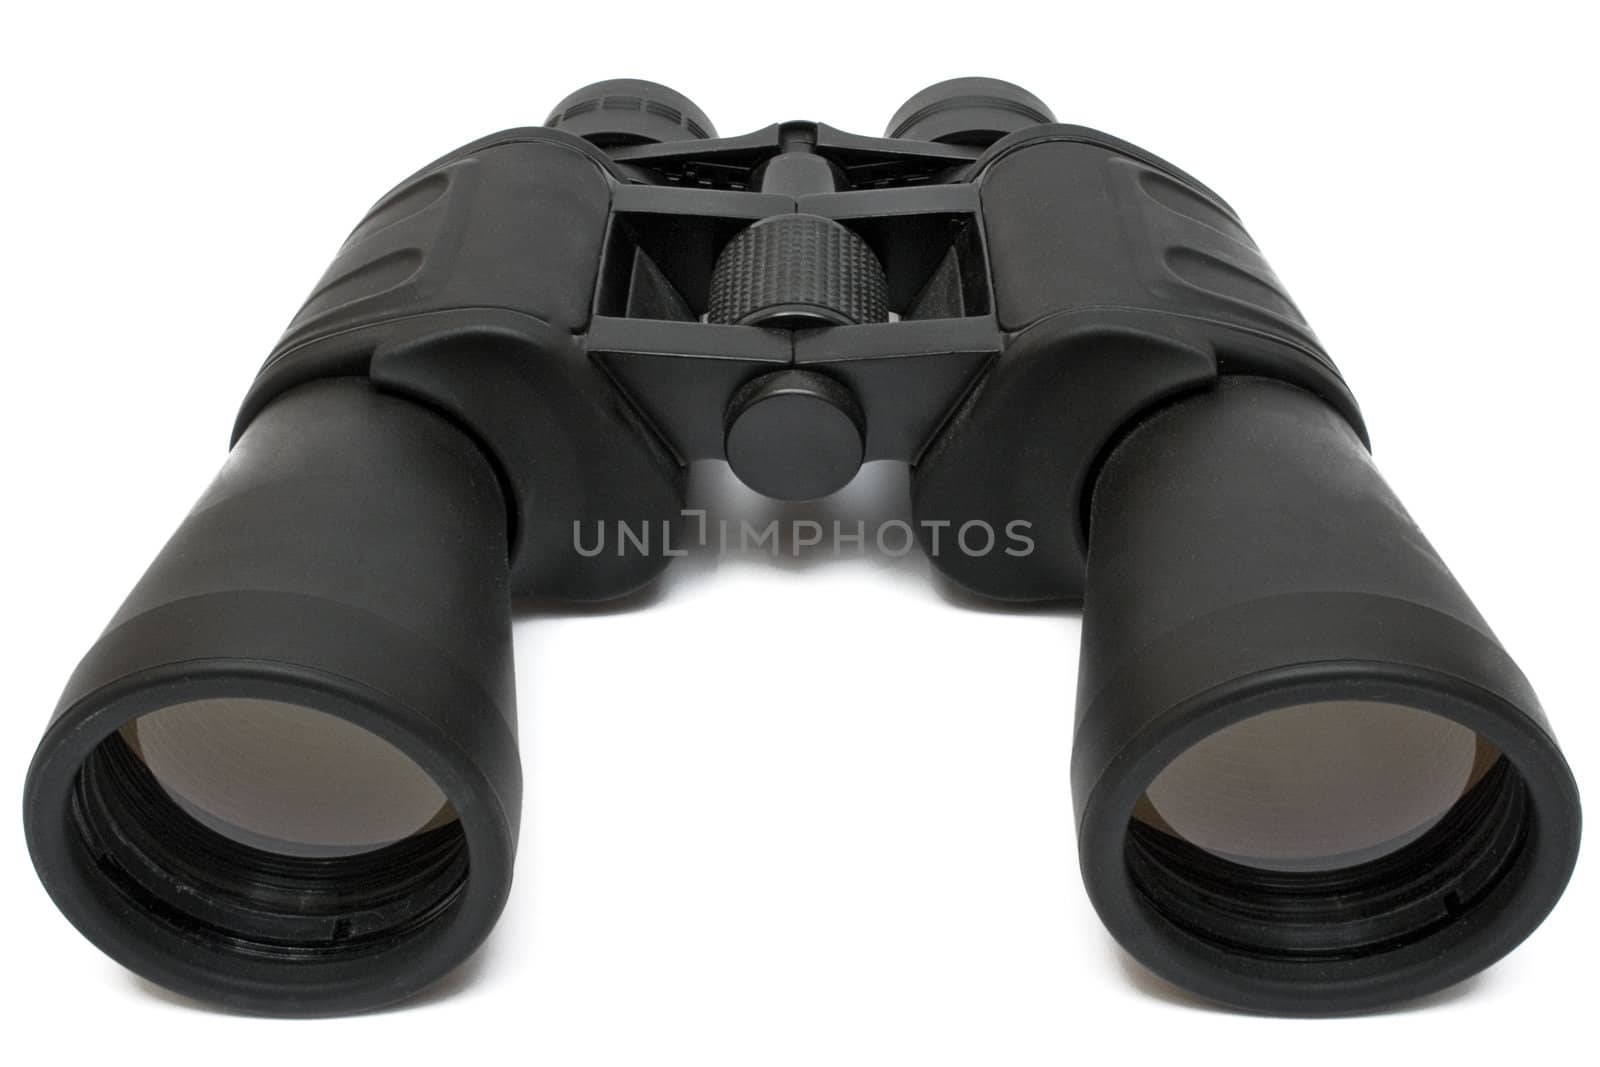 Black binoculars isolated on a white background. File contains clipping path.